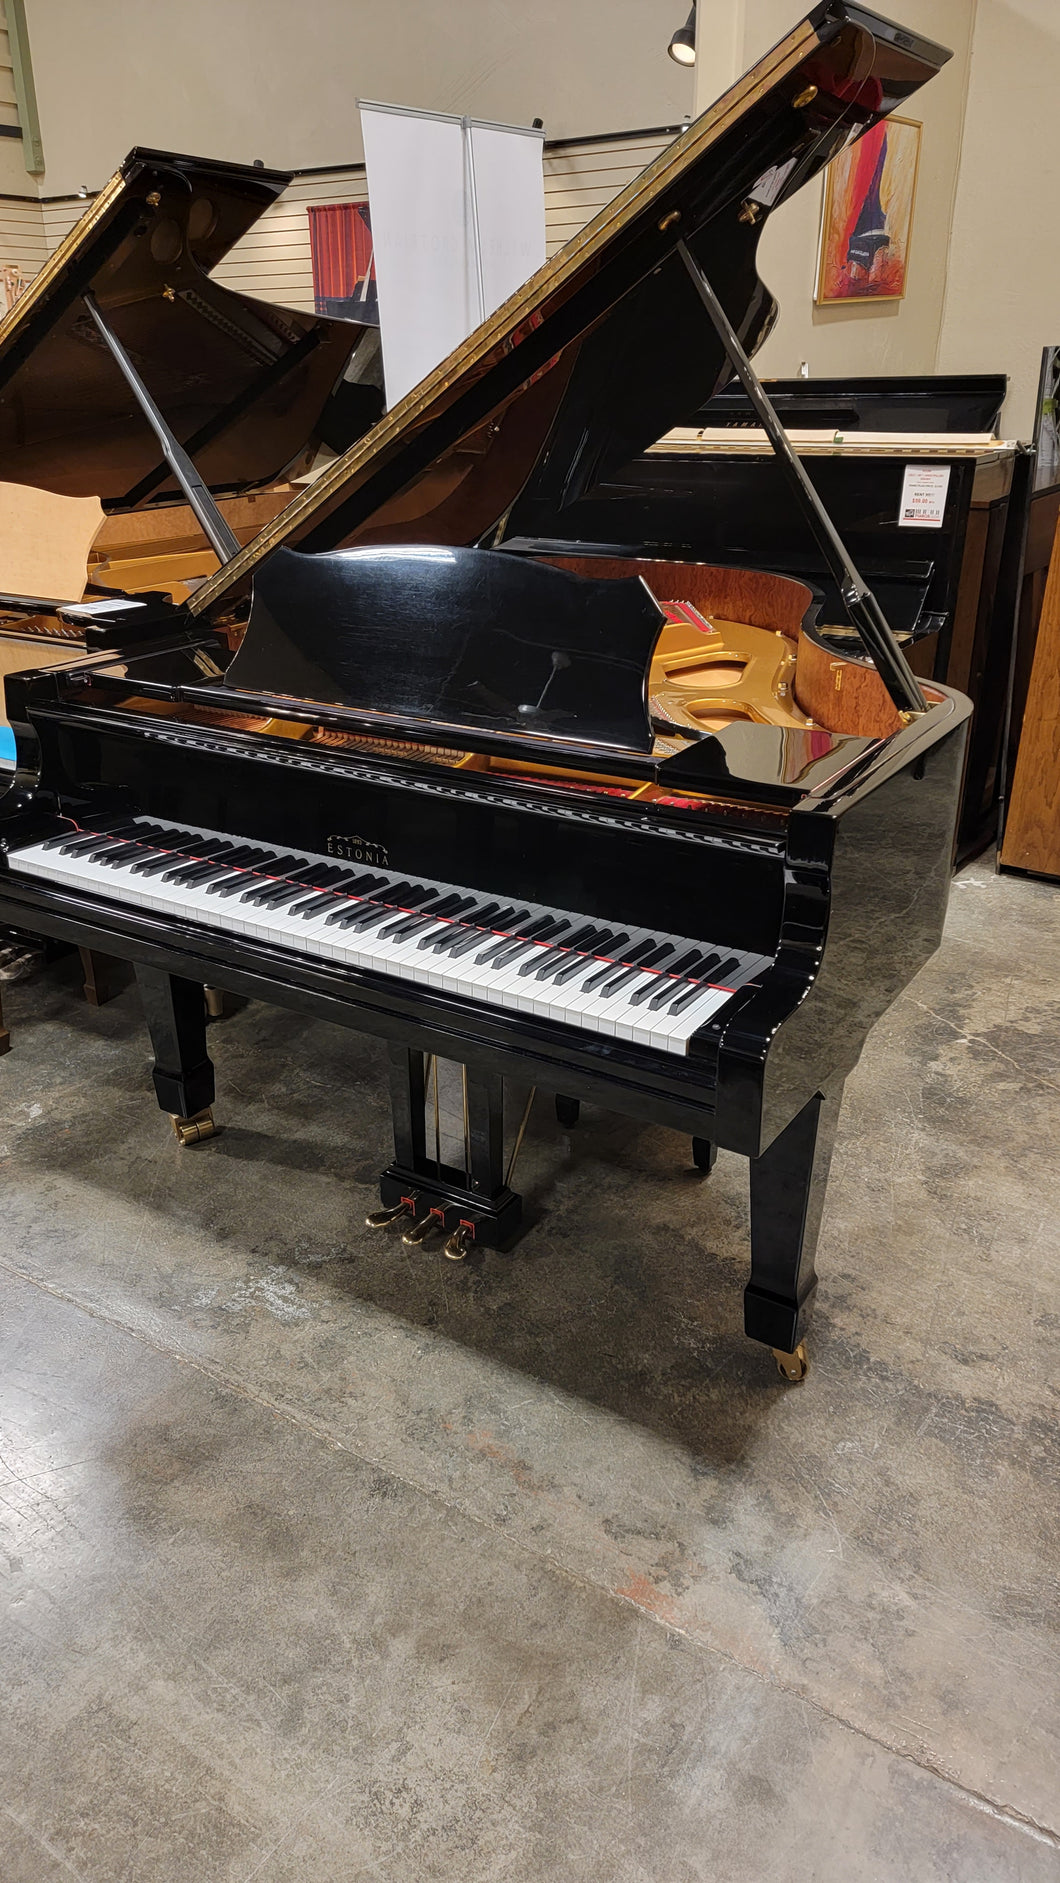 Used European Piano, Estonia from the best piano dealer in the bay area